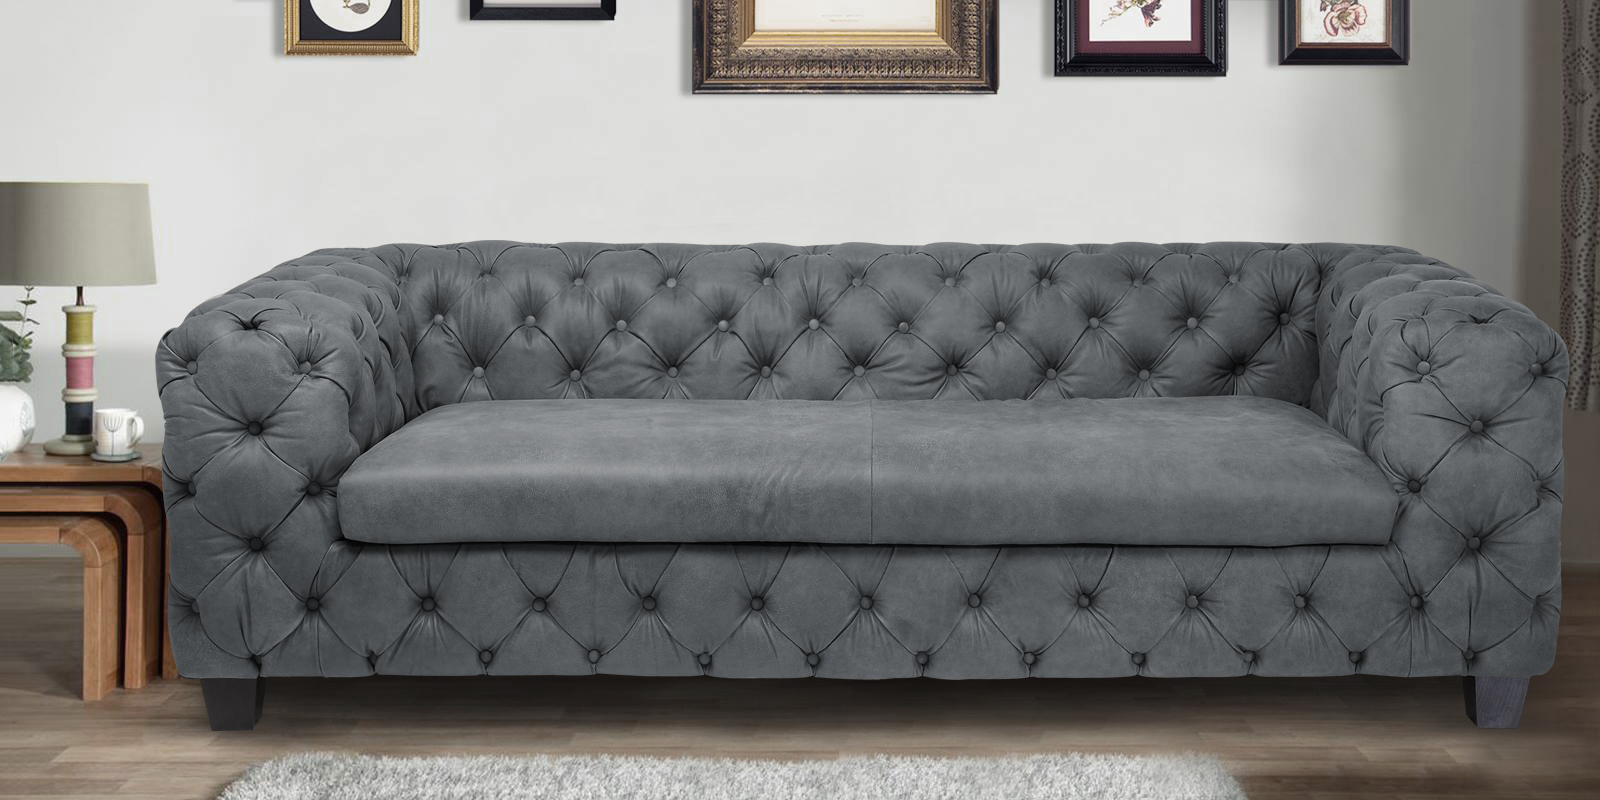 Beguiling Leatherette 3 Seater Sofa In